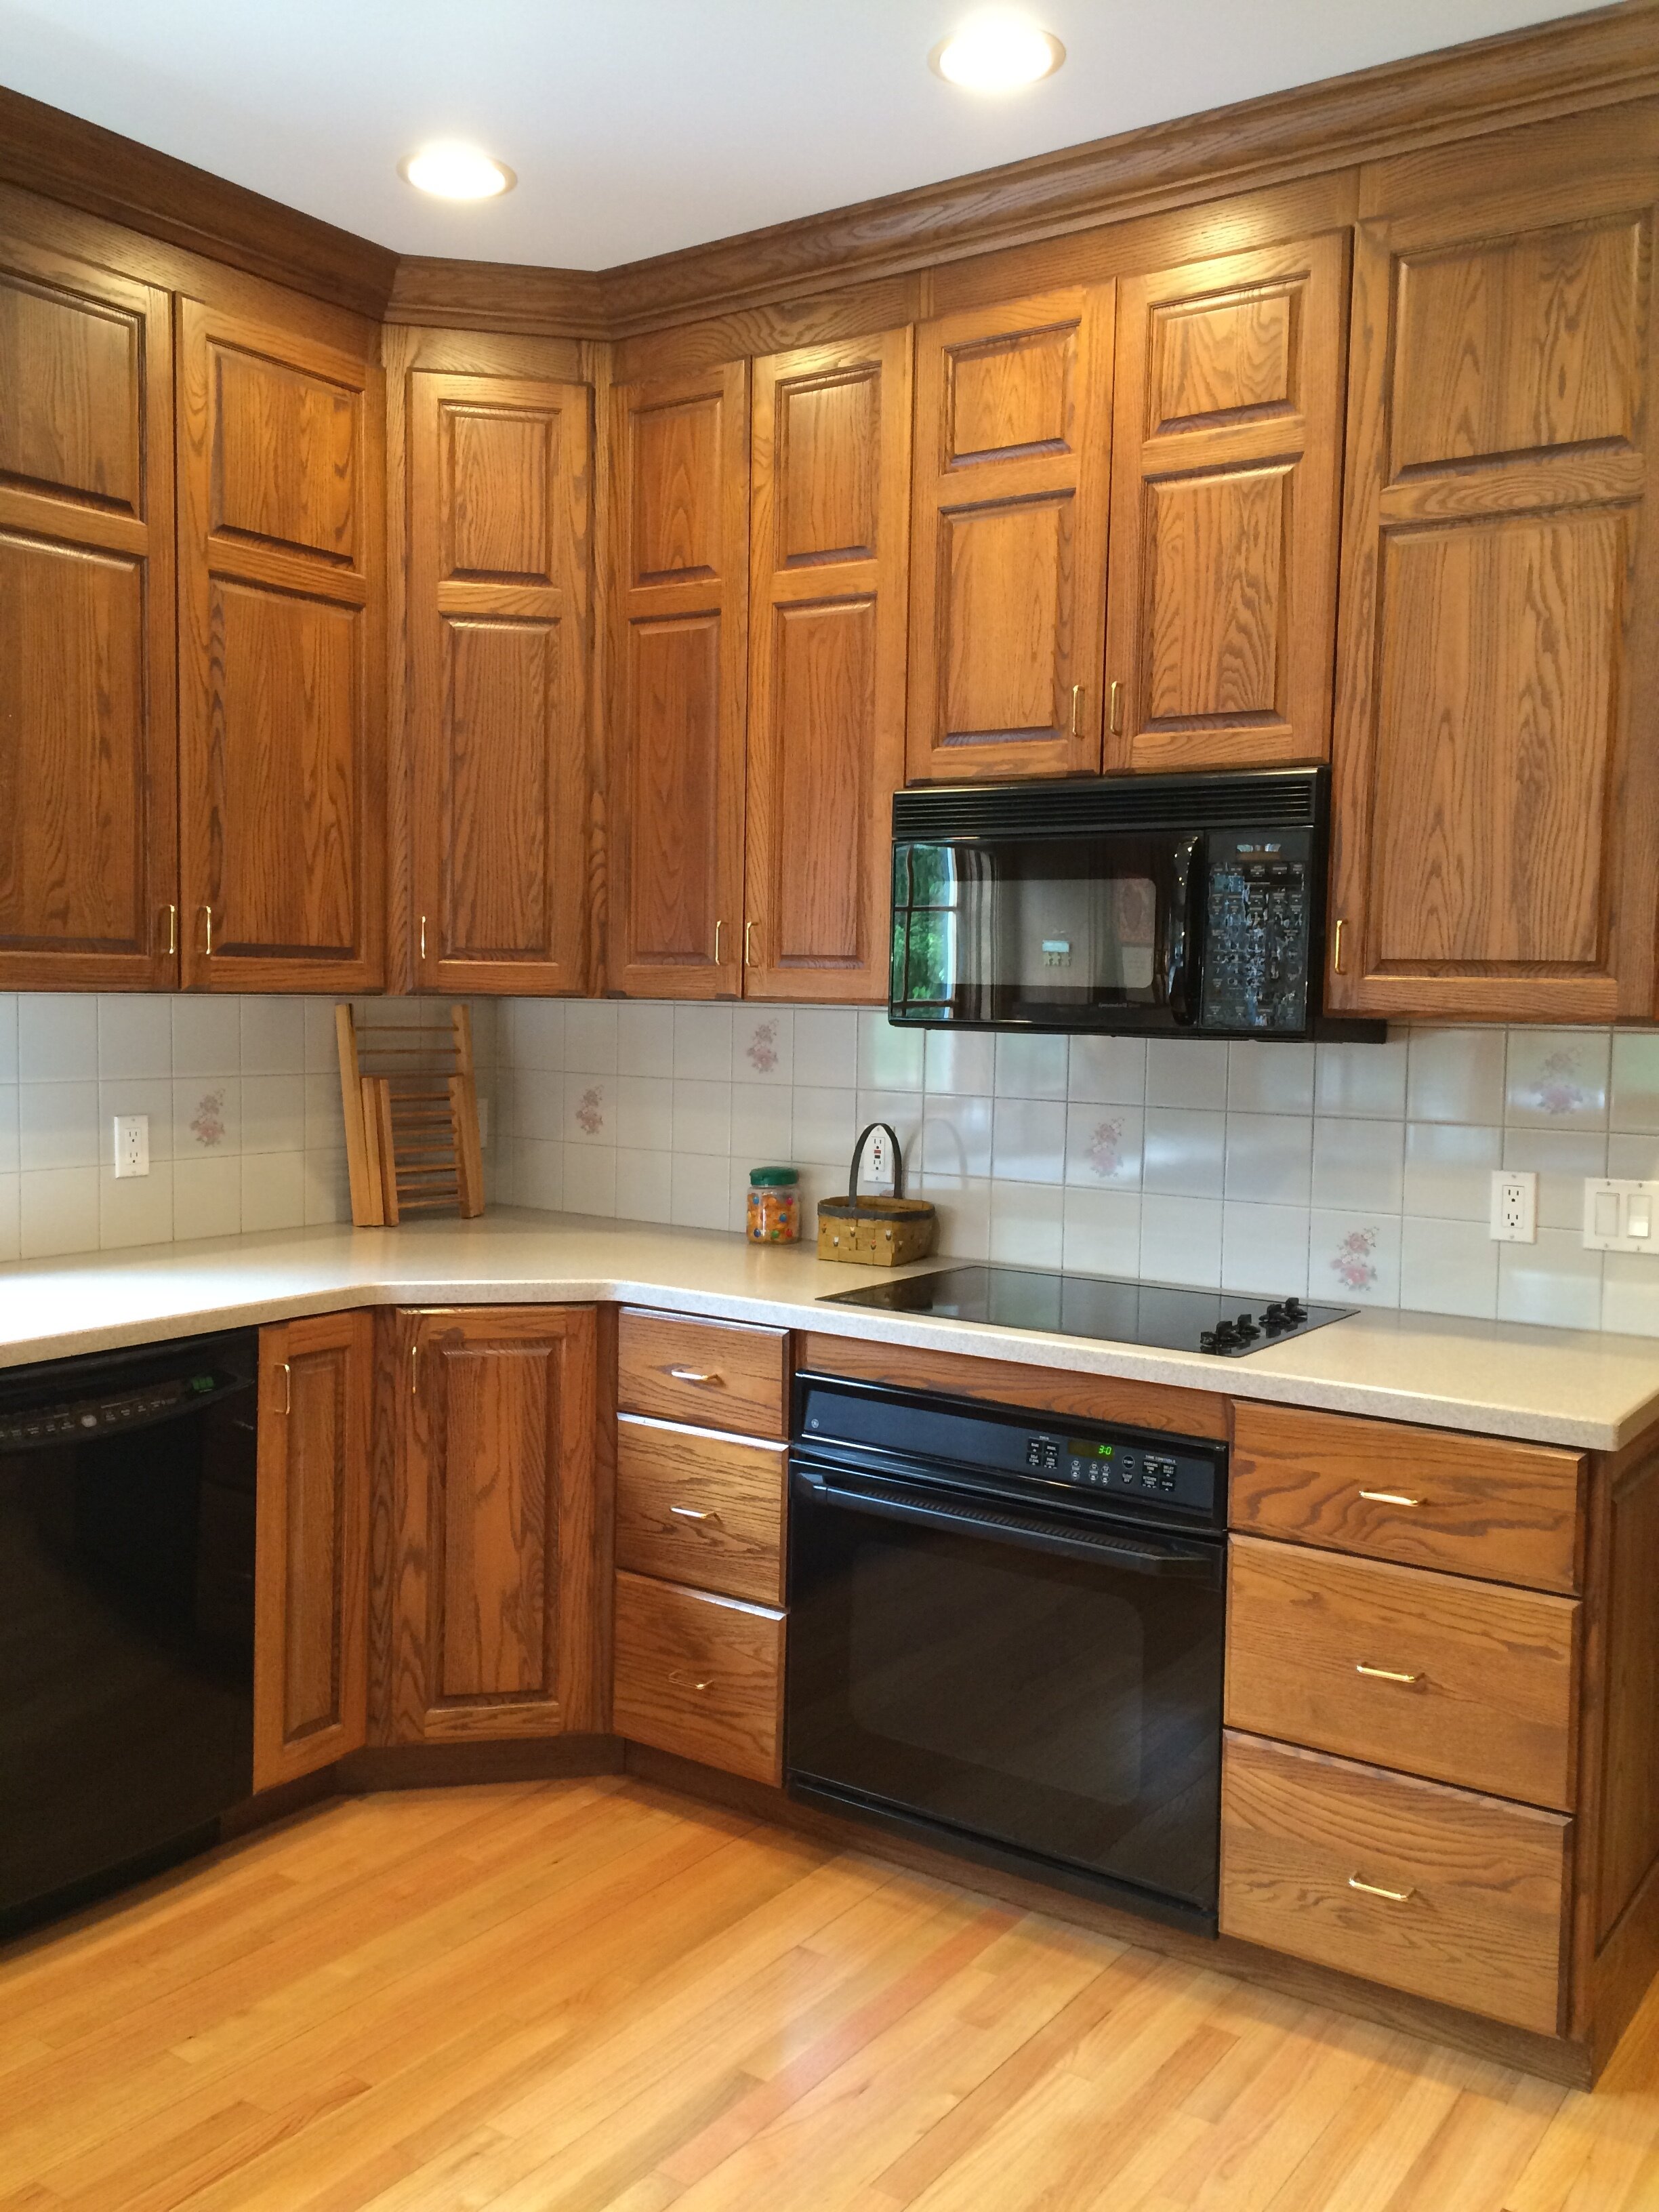 How To Make An Oak Kitchen Cool Again, What Color Floor Tile Goes With Oak Cabinets